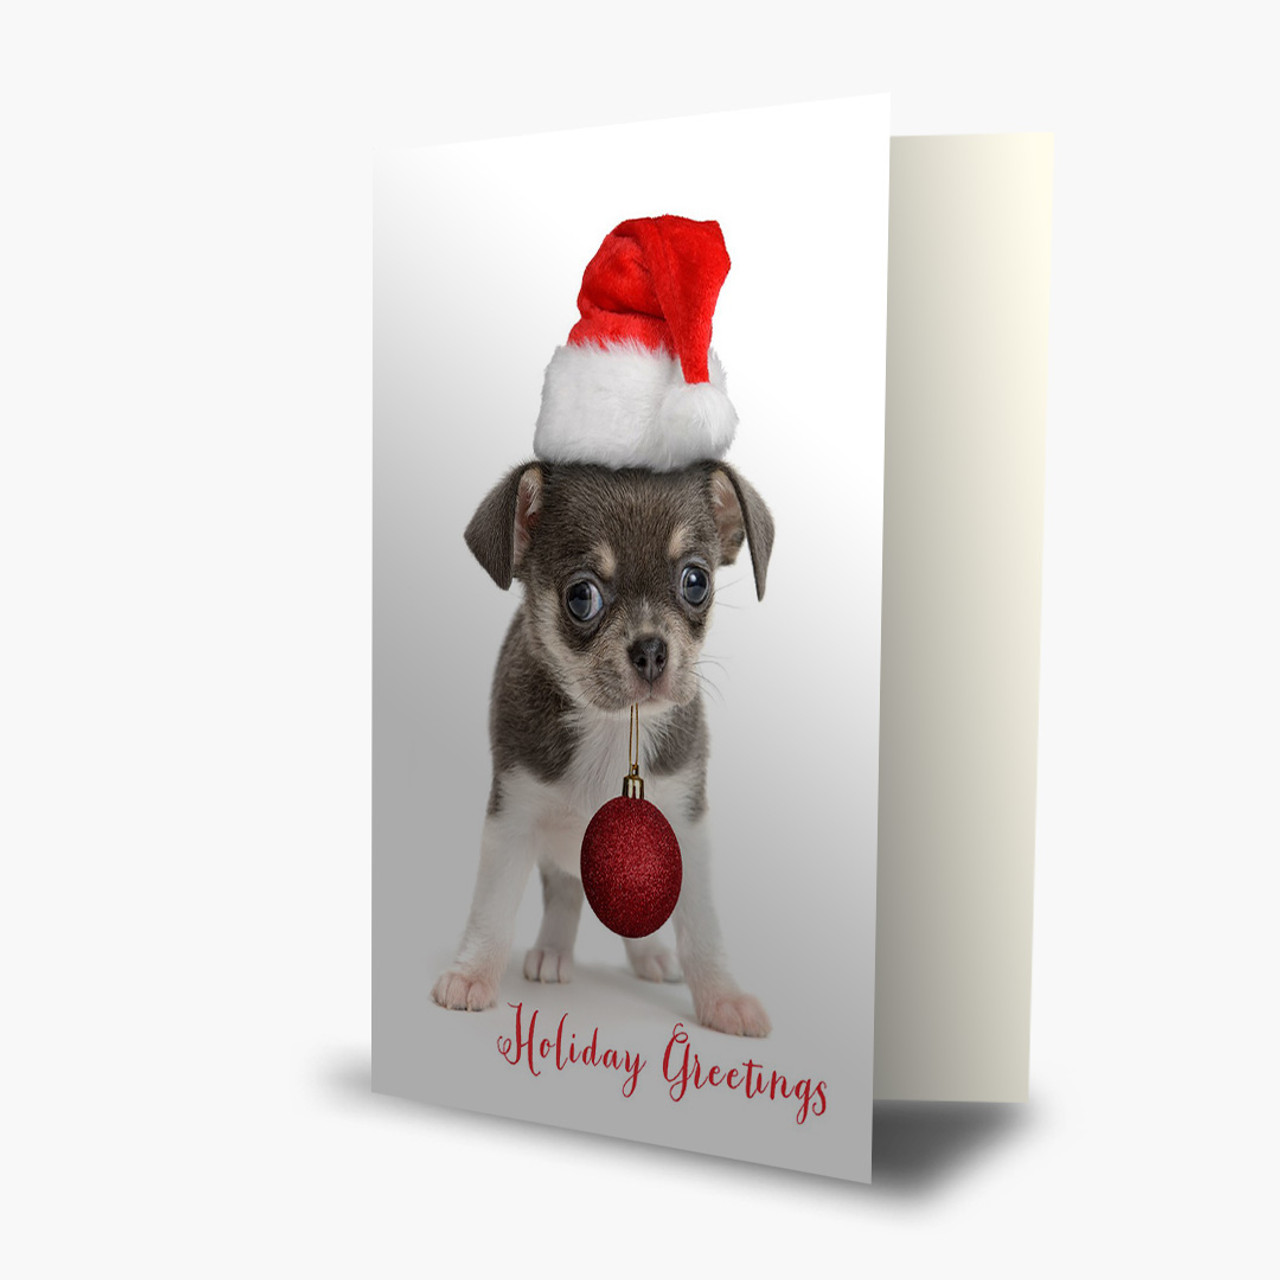 Puppy Greetings Christmas Card